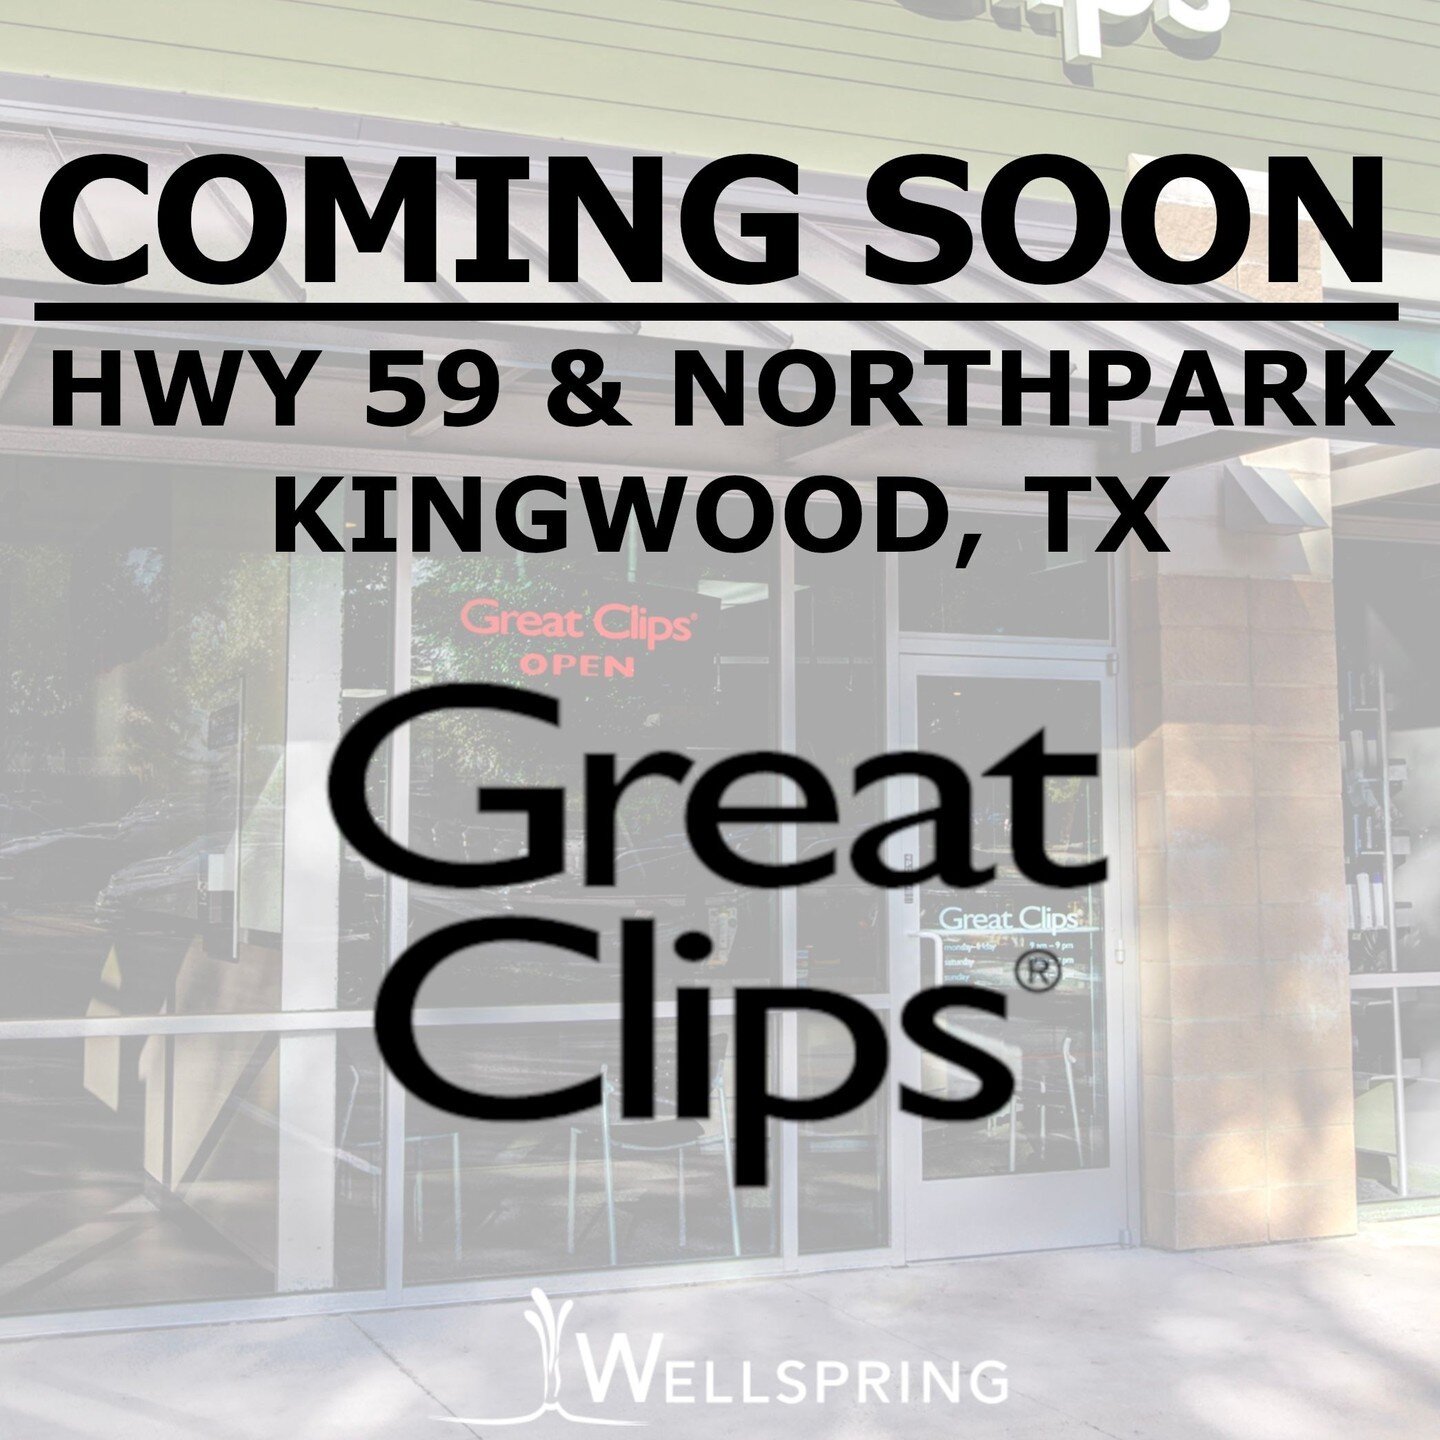 Wellspring Commercial Real Estate is ready to announce that Great Clips is relocating from the NEC (Kroger) to the SWC (HEB) in Kingwood along Hwy 59 &amp; Northpark! 

Court Richardson and Bryan Dabbs represented the Landlord, and Marshall C. Bumpus